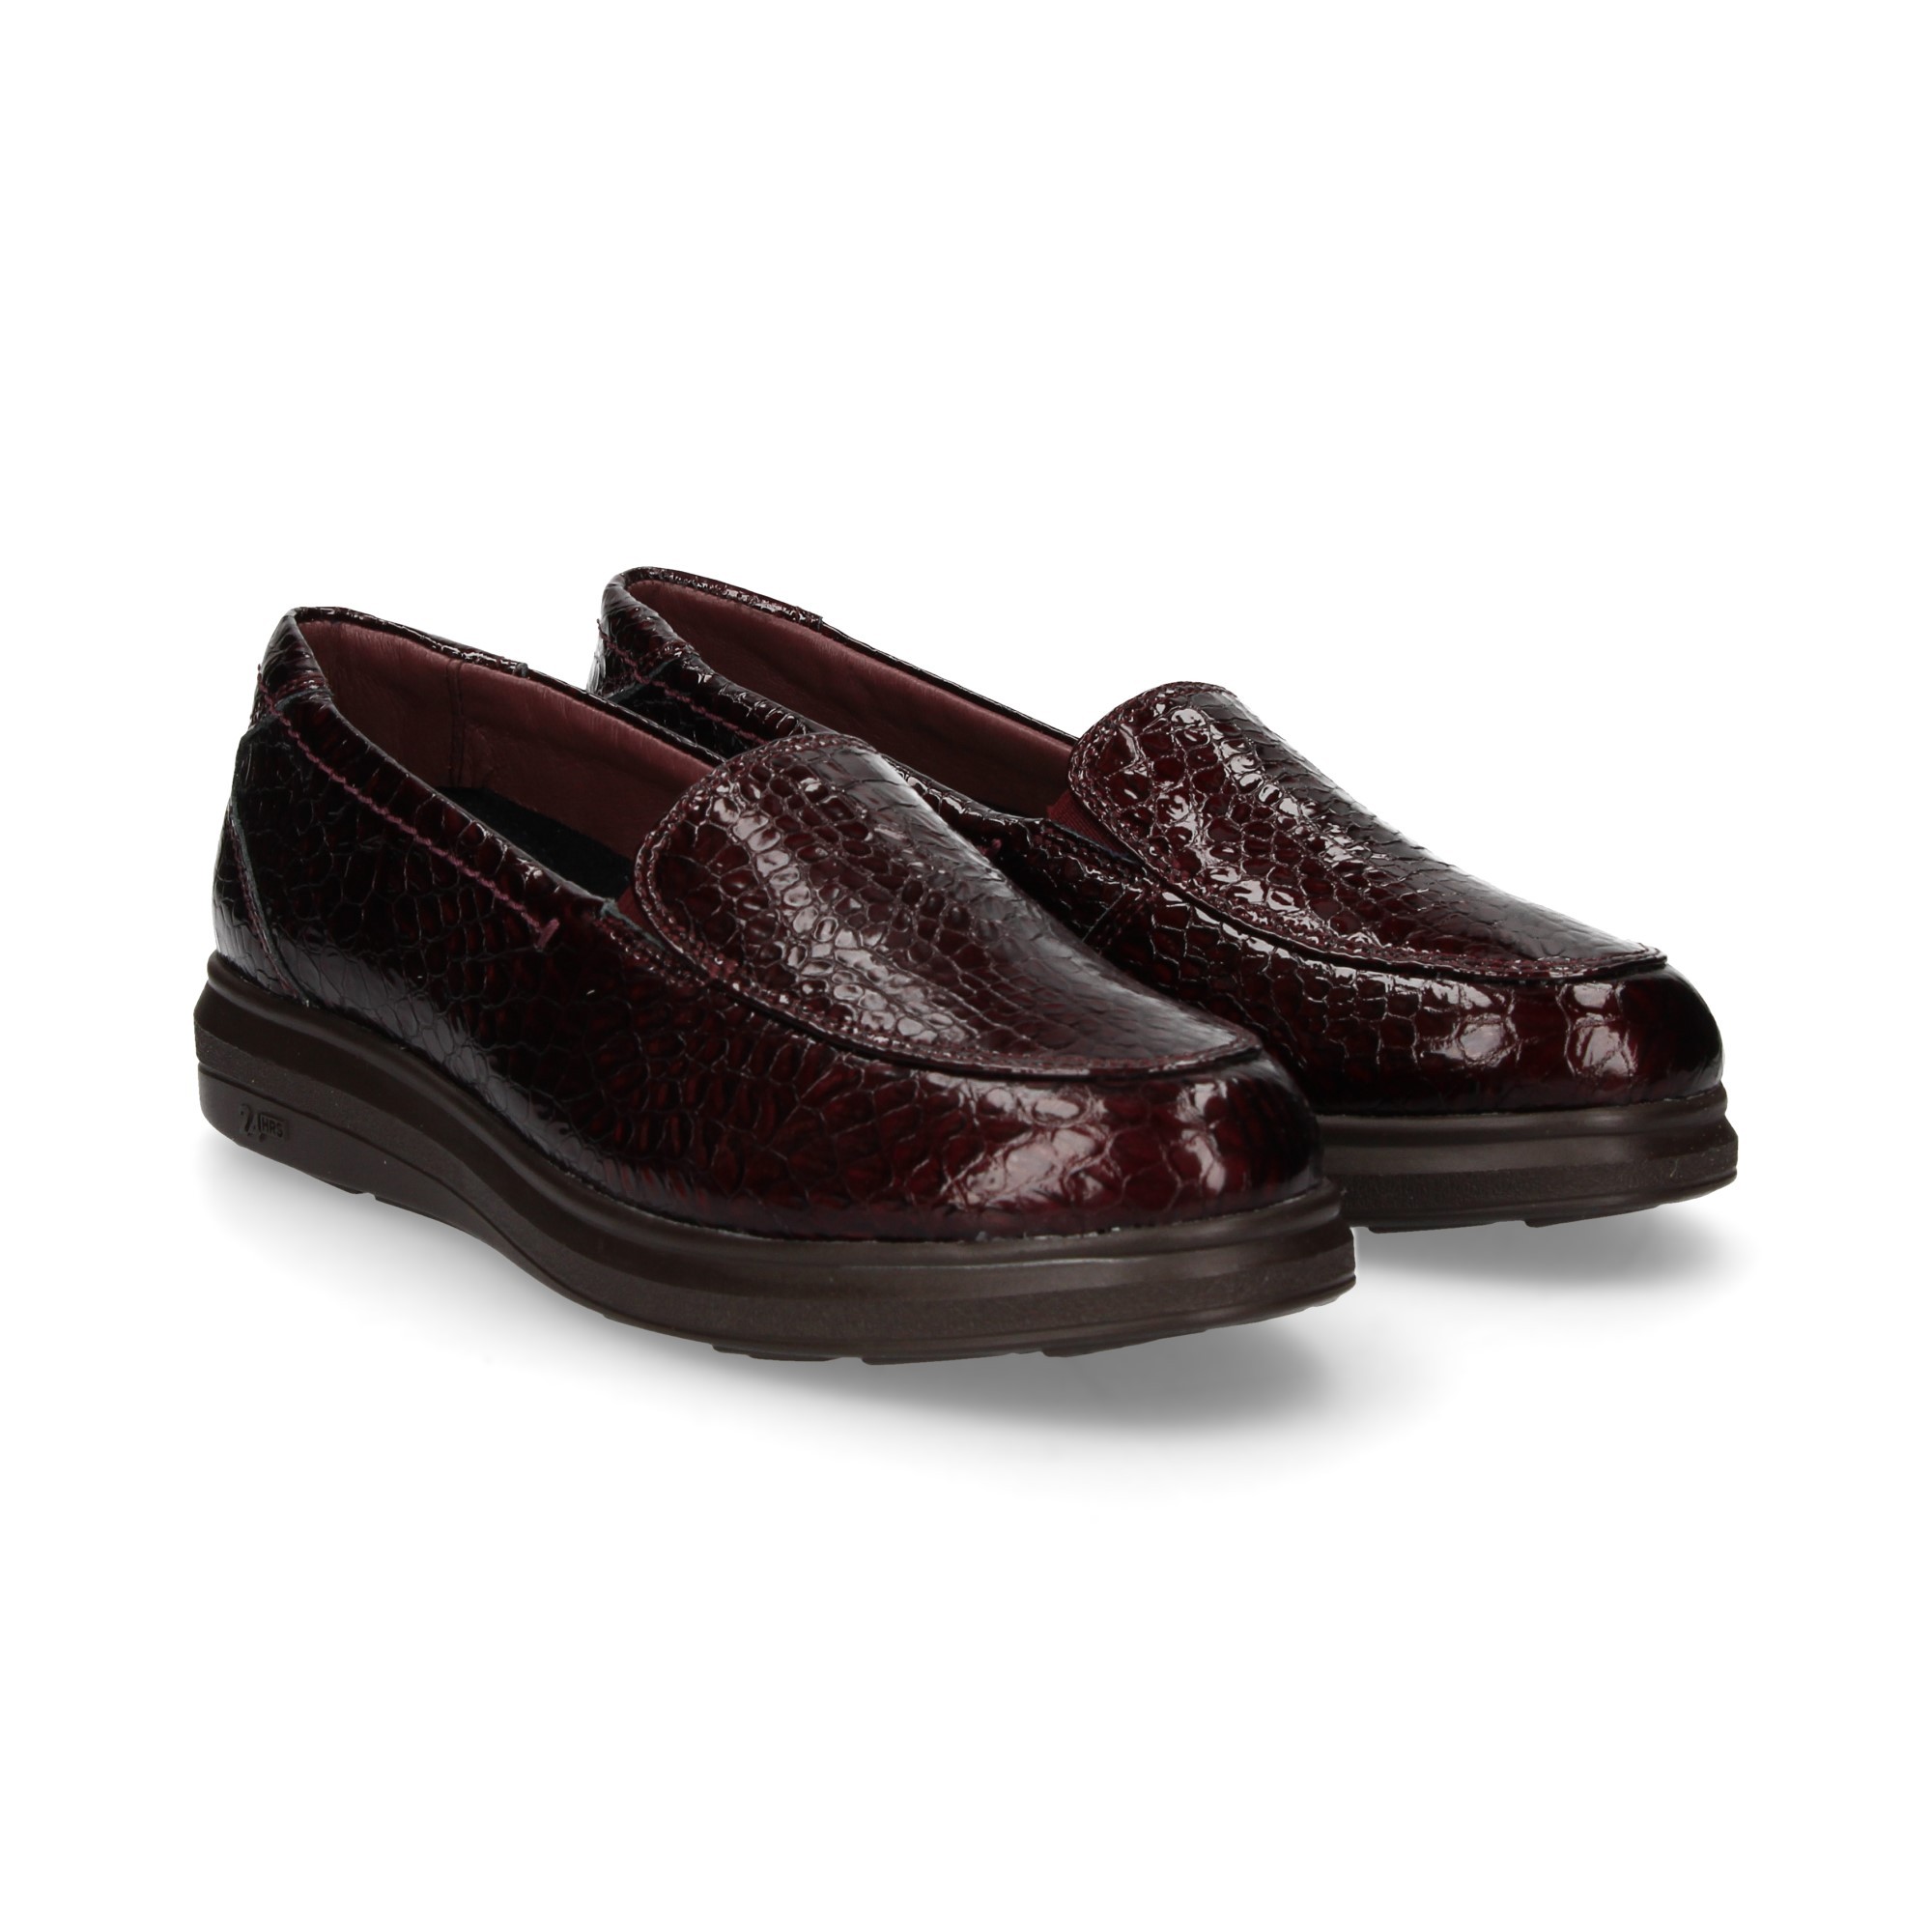 moccasin-elast-sides-patent-leather-coco-burgundy